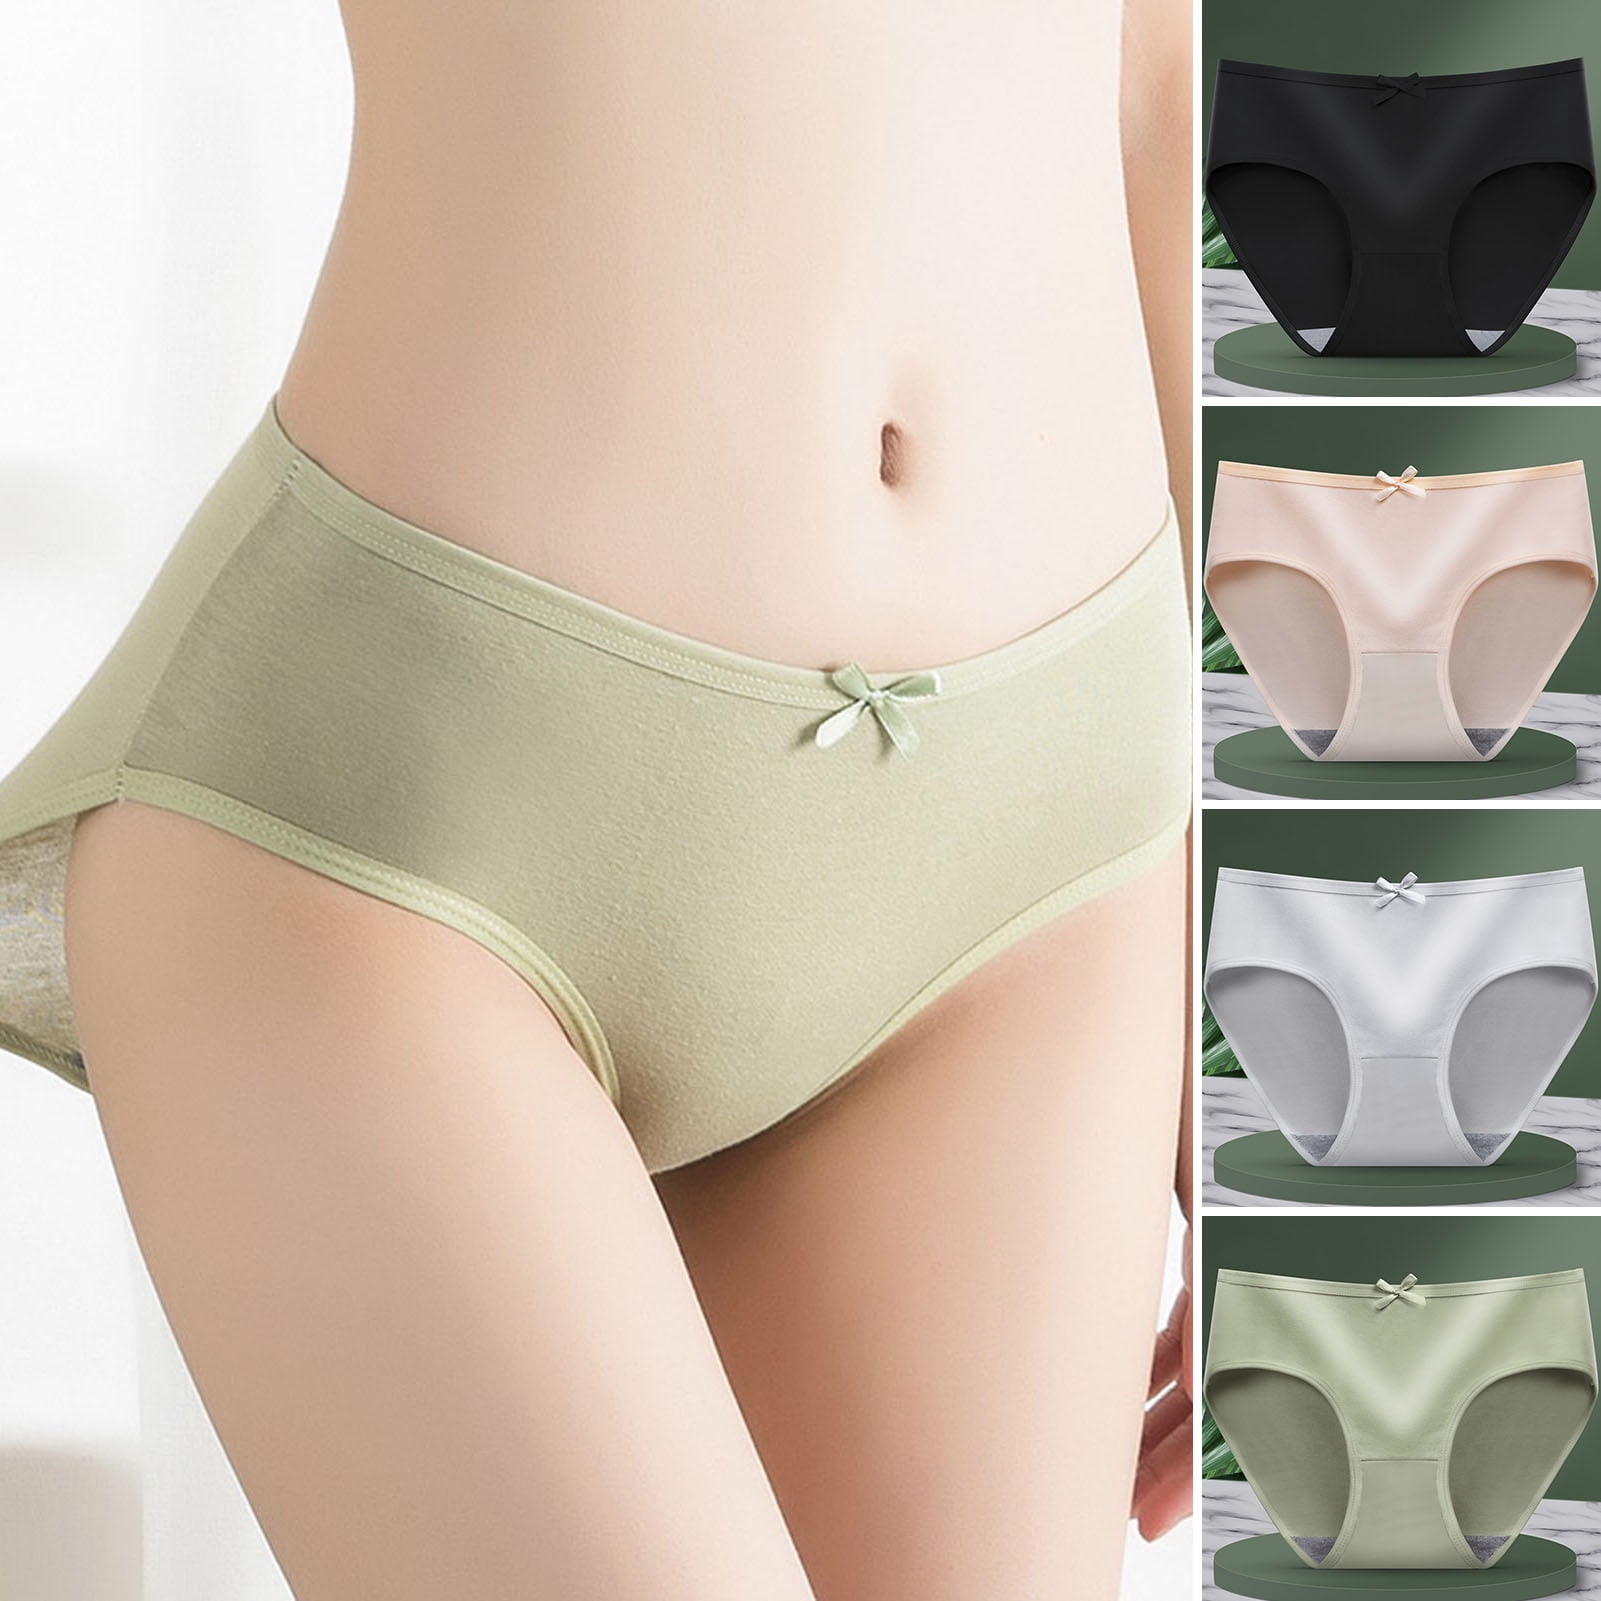 rygai Women Underwear Breathable Mid Waist Elastic Korean Style Girl  Underpants Intimates for Daily Wear,Skin Color M 